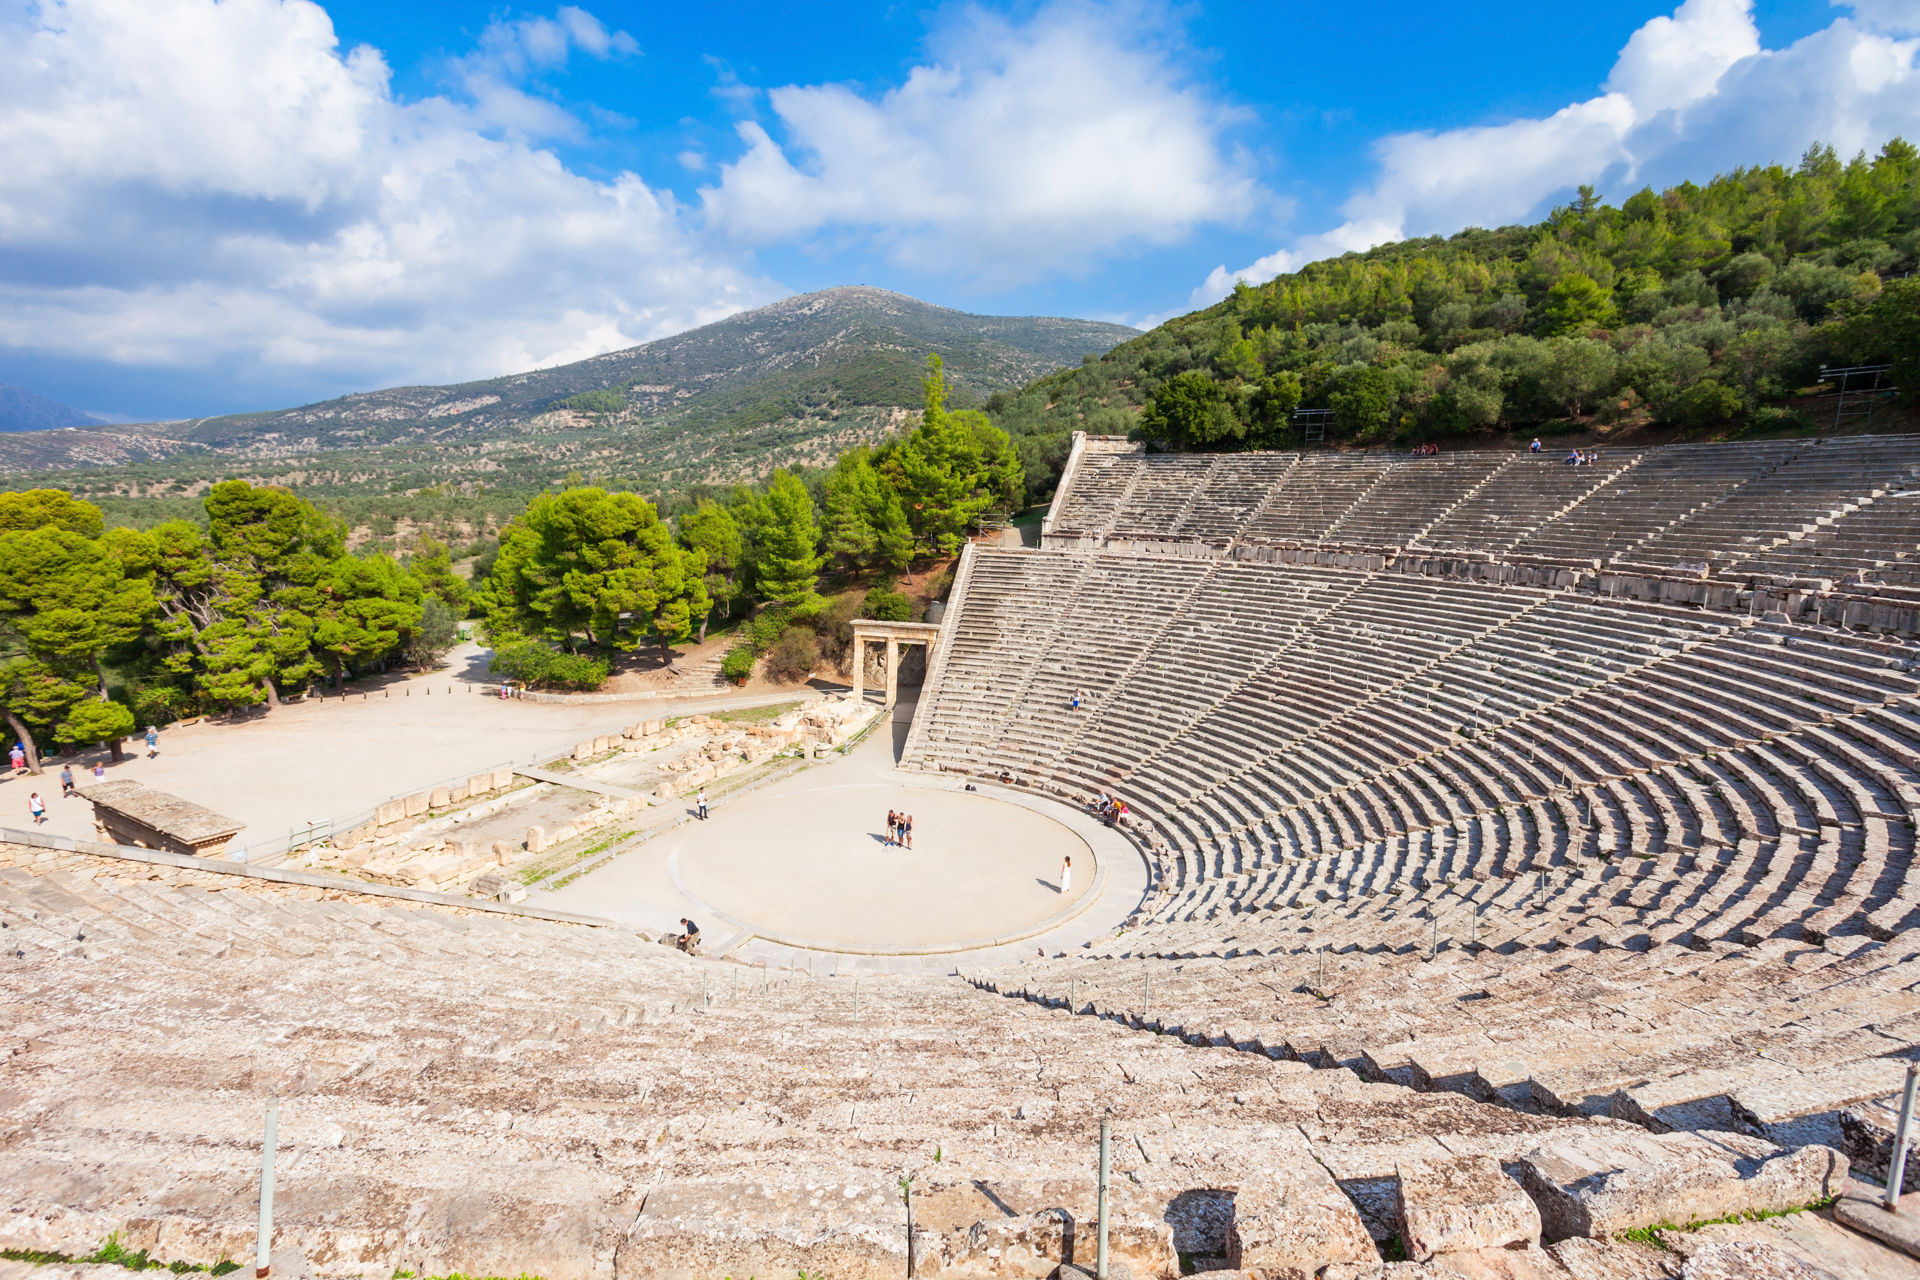 The Epidaurus Ancient Theatre is a theatre in the Greek city of Epidaurus, built on the Cynortion Mountain, near Lygourio, and belongs to the Epidaurus Municipality.